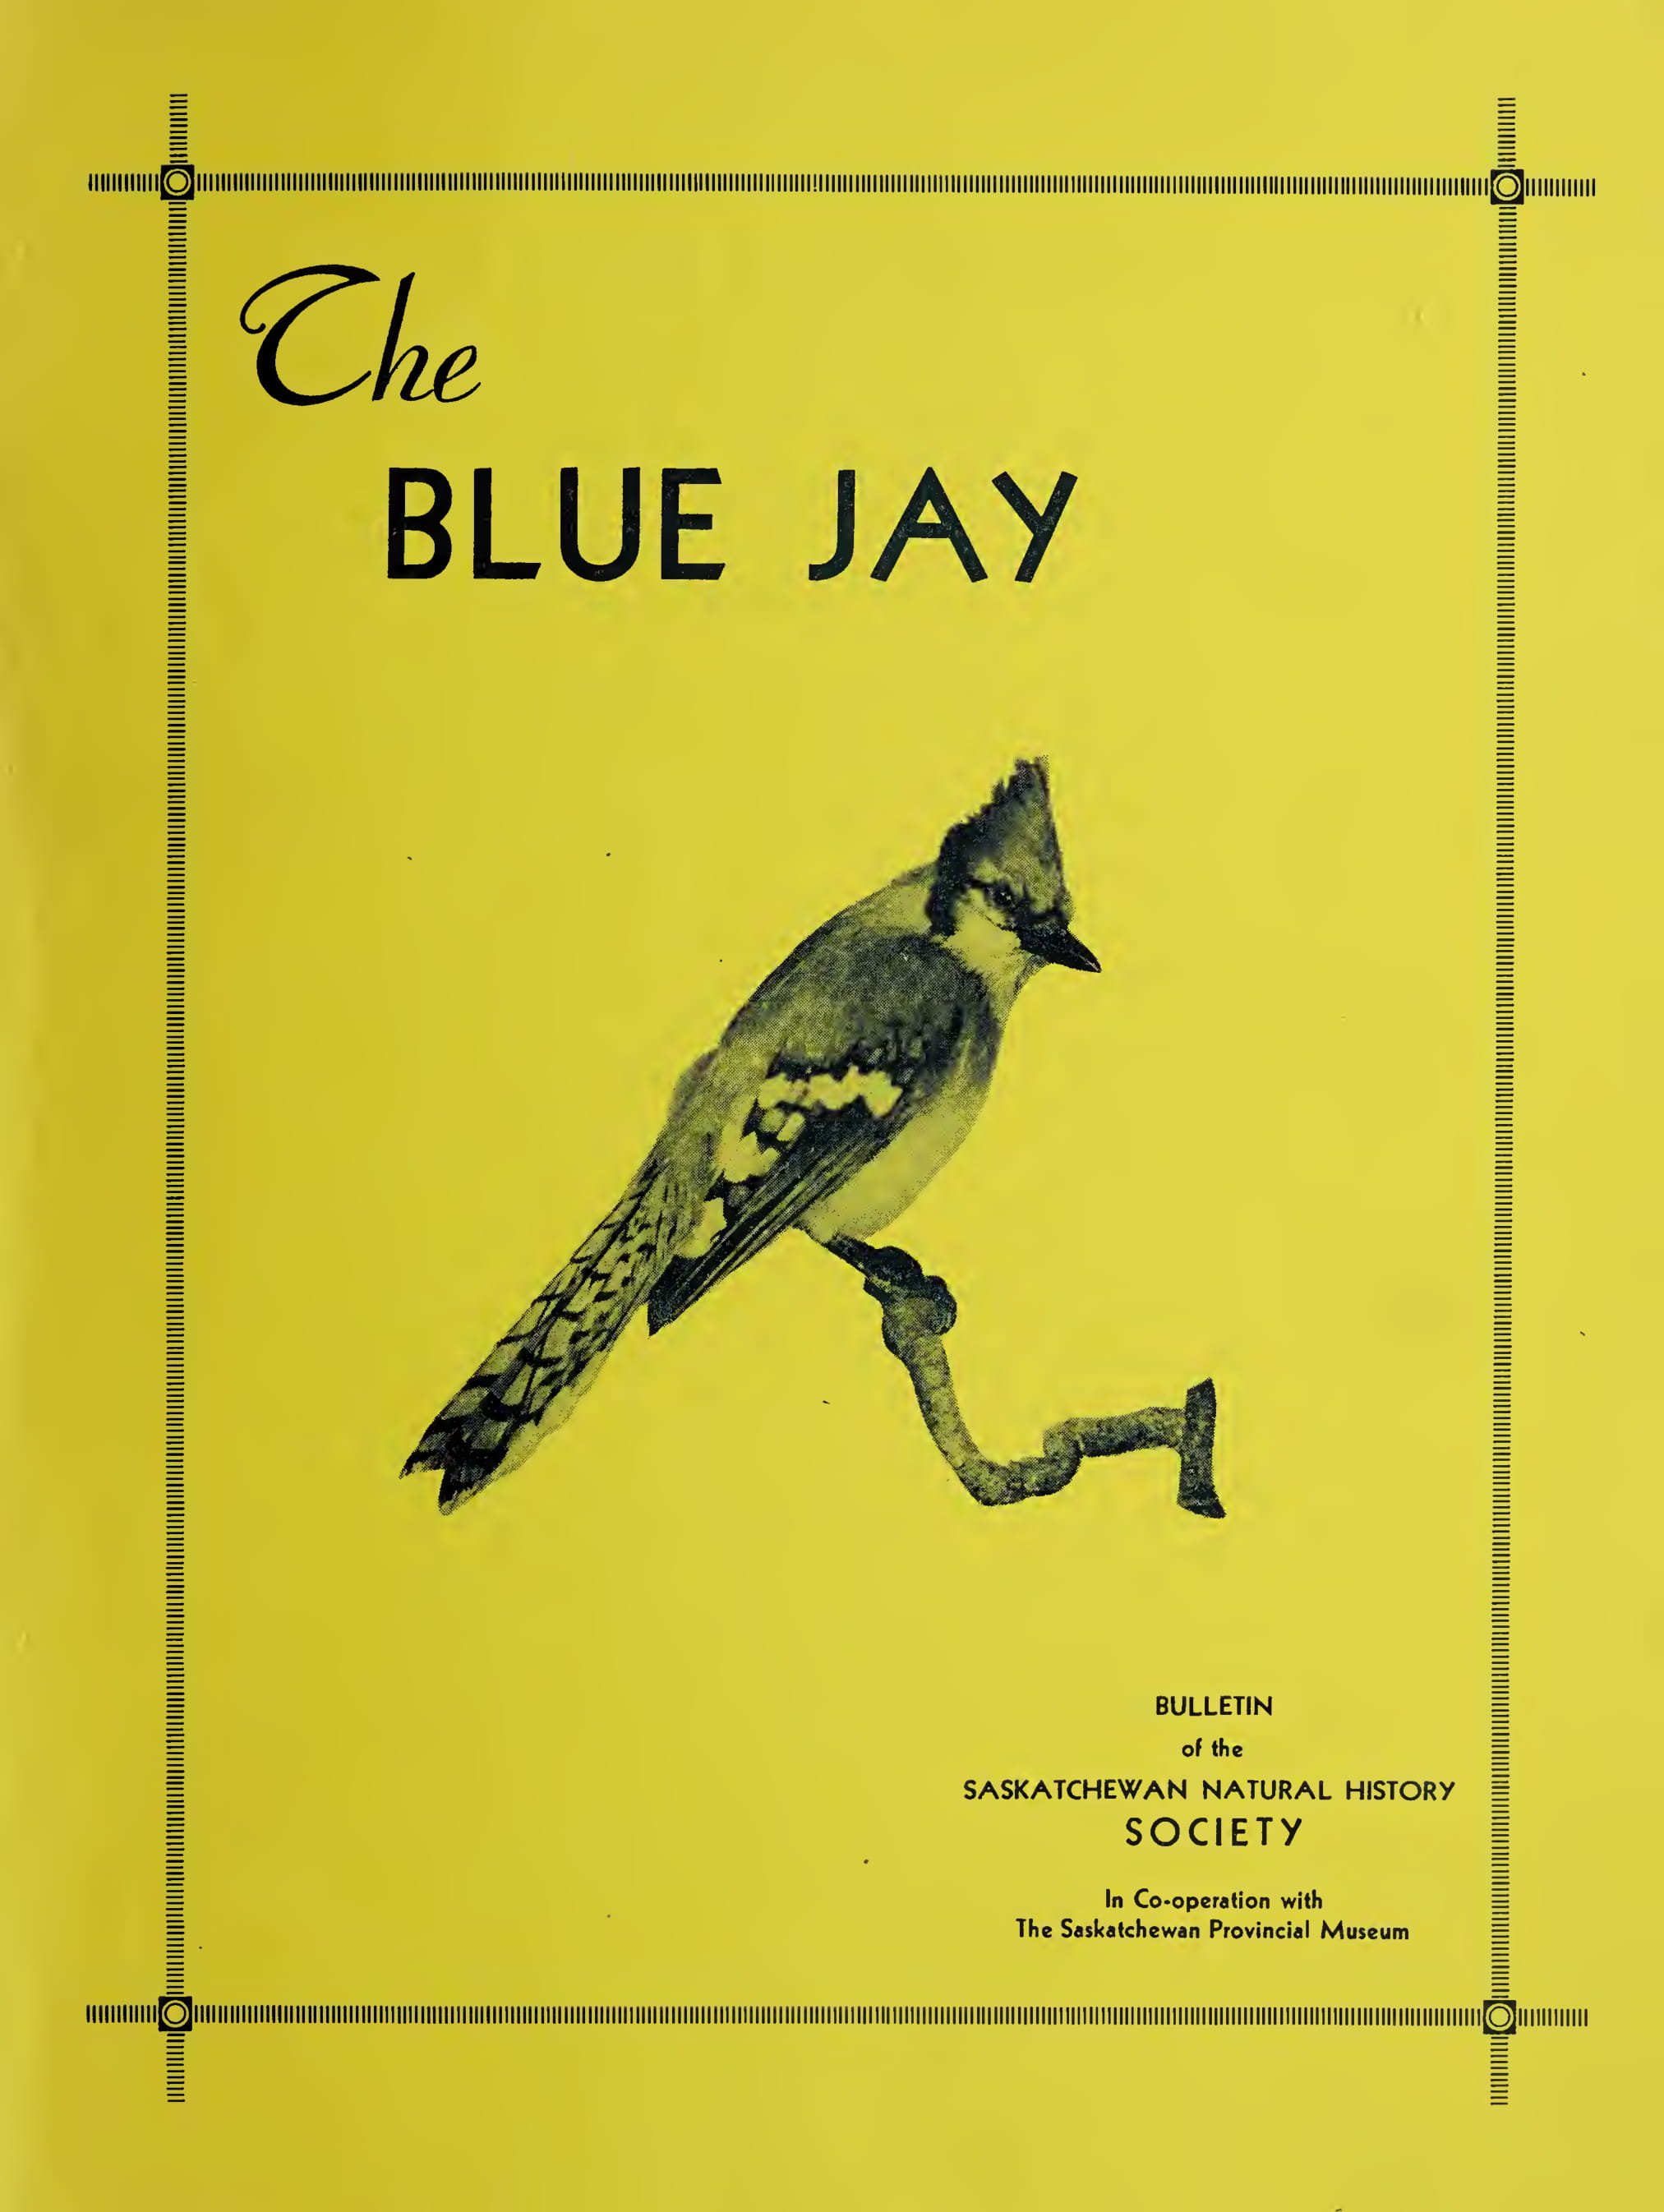 Cover Image for Summer 1949